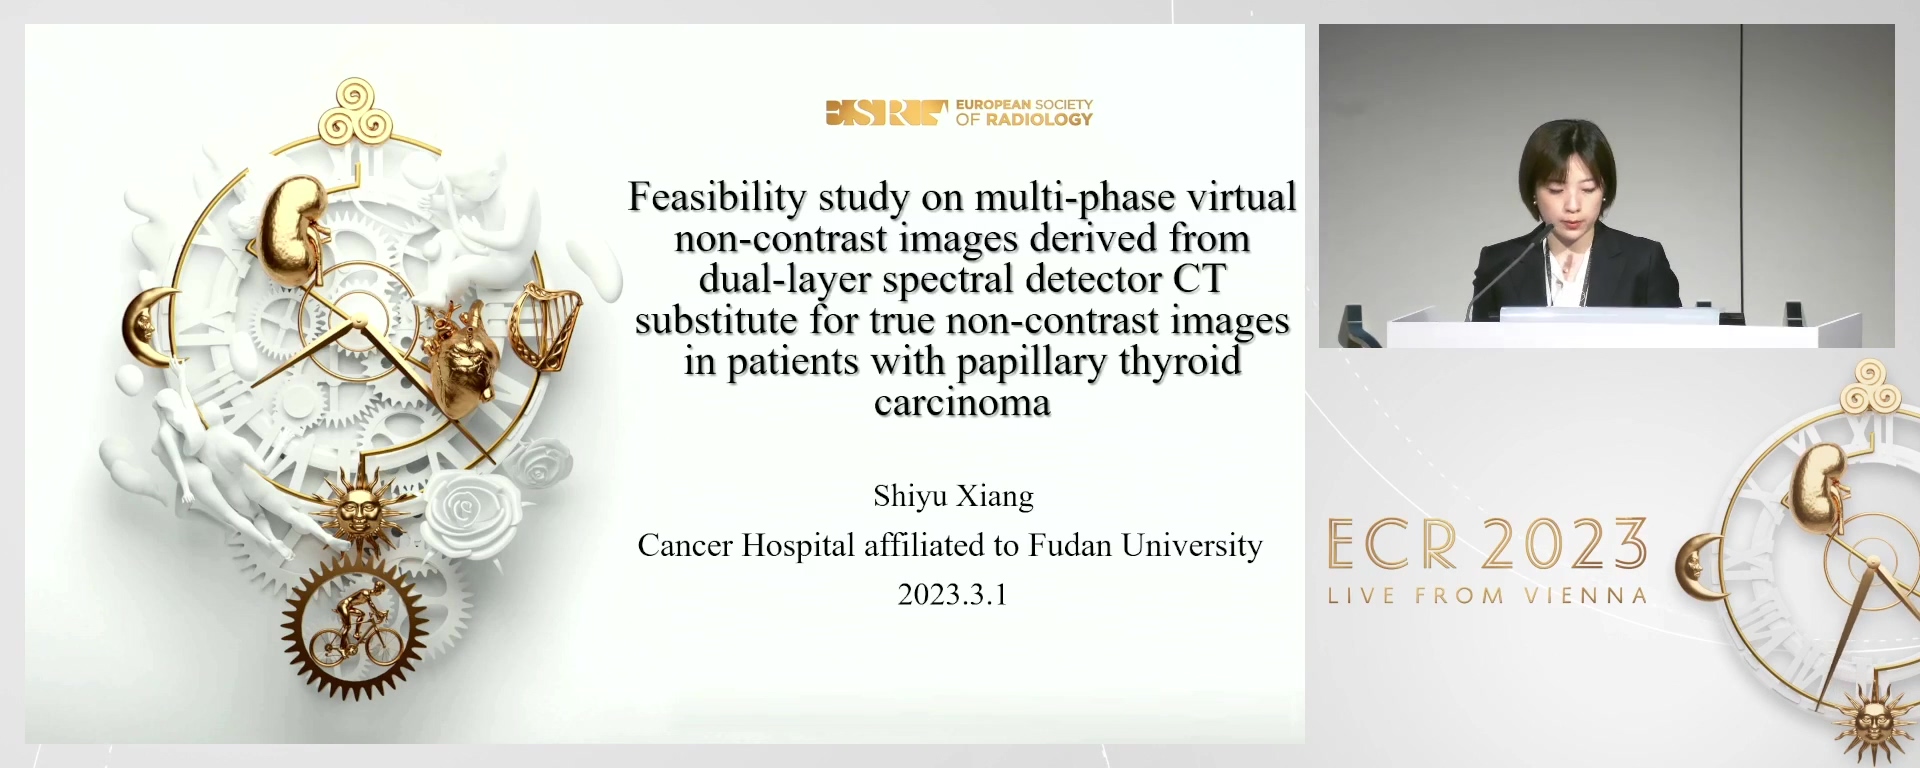 Feasibility study on multi-phase virtual non-contrast images derived from dual-layer spectral detector CT substitute for true non-contrast images in patients with thyroid carcinoma - Xiang  Shiyu, Shanghai / CN